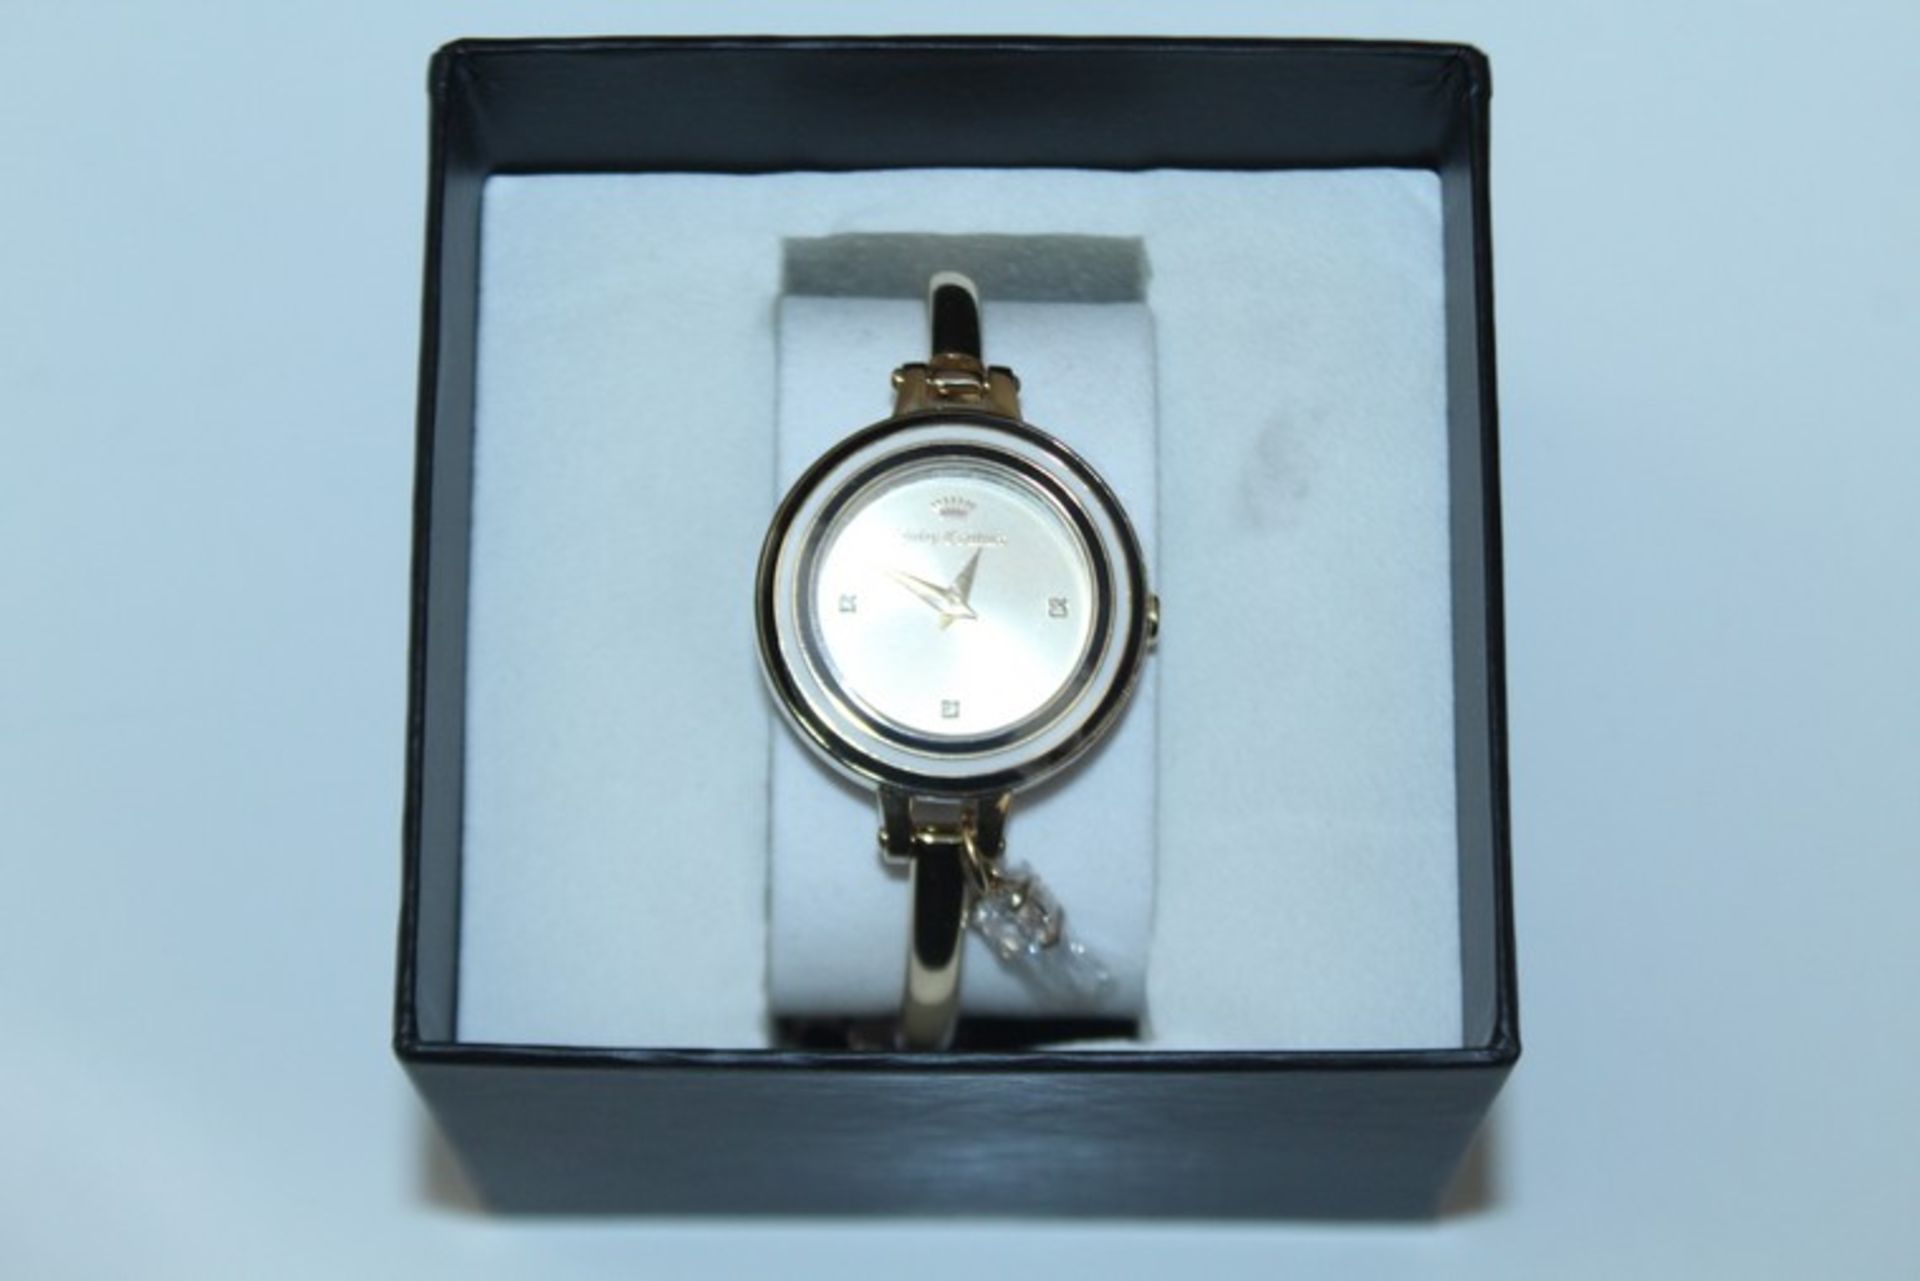 1 x BOXED BRAND NEW WITH 2 YEARS INTERNATIONAL WARRANTY JUICY COUTURE WRIST WATCH RRP £150 (1901434)